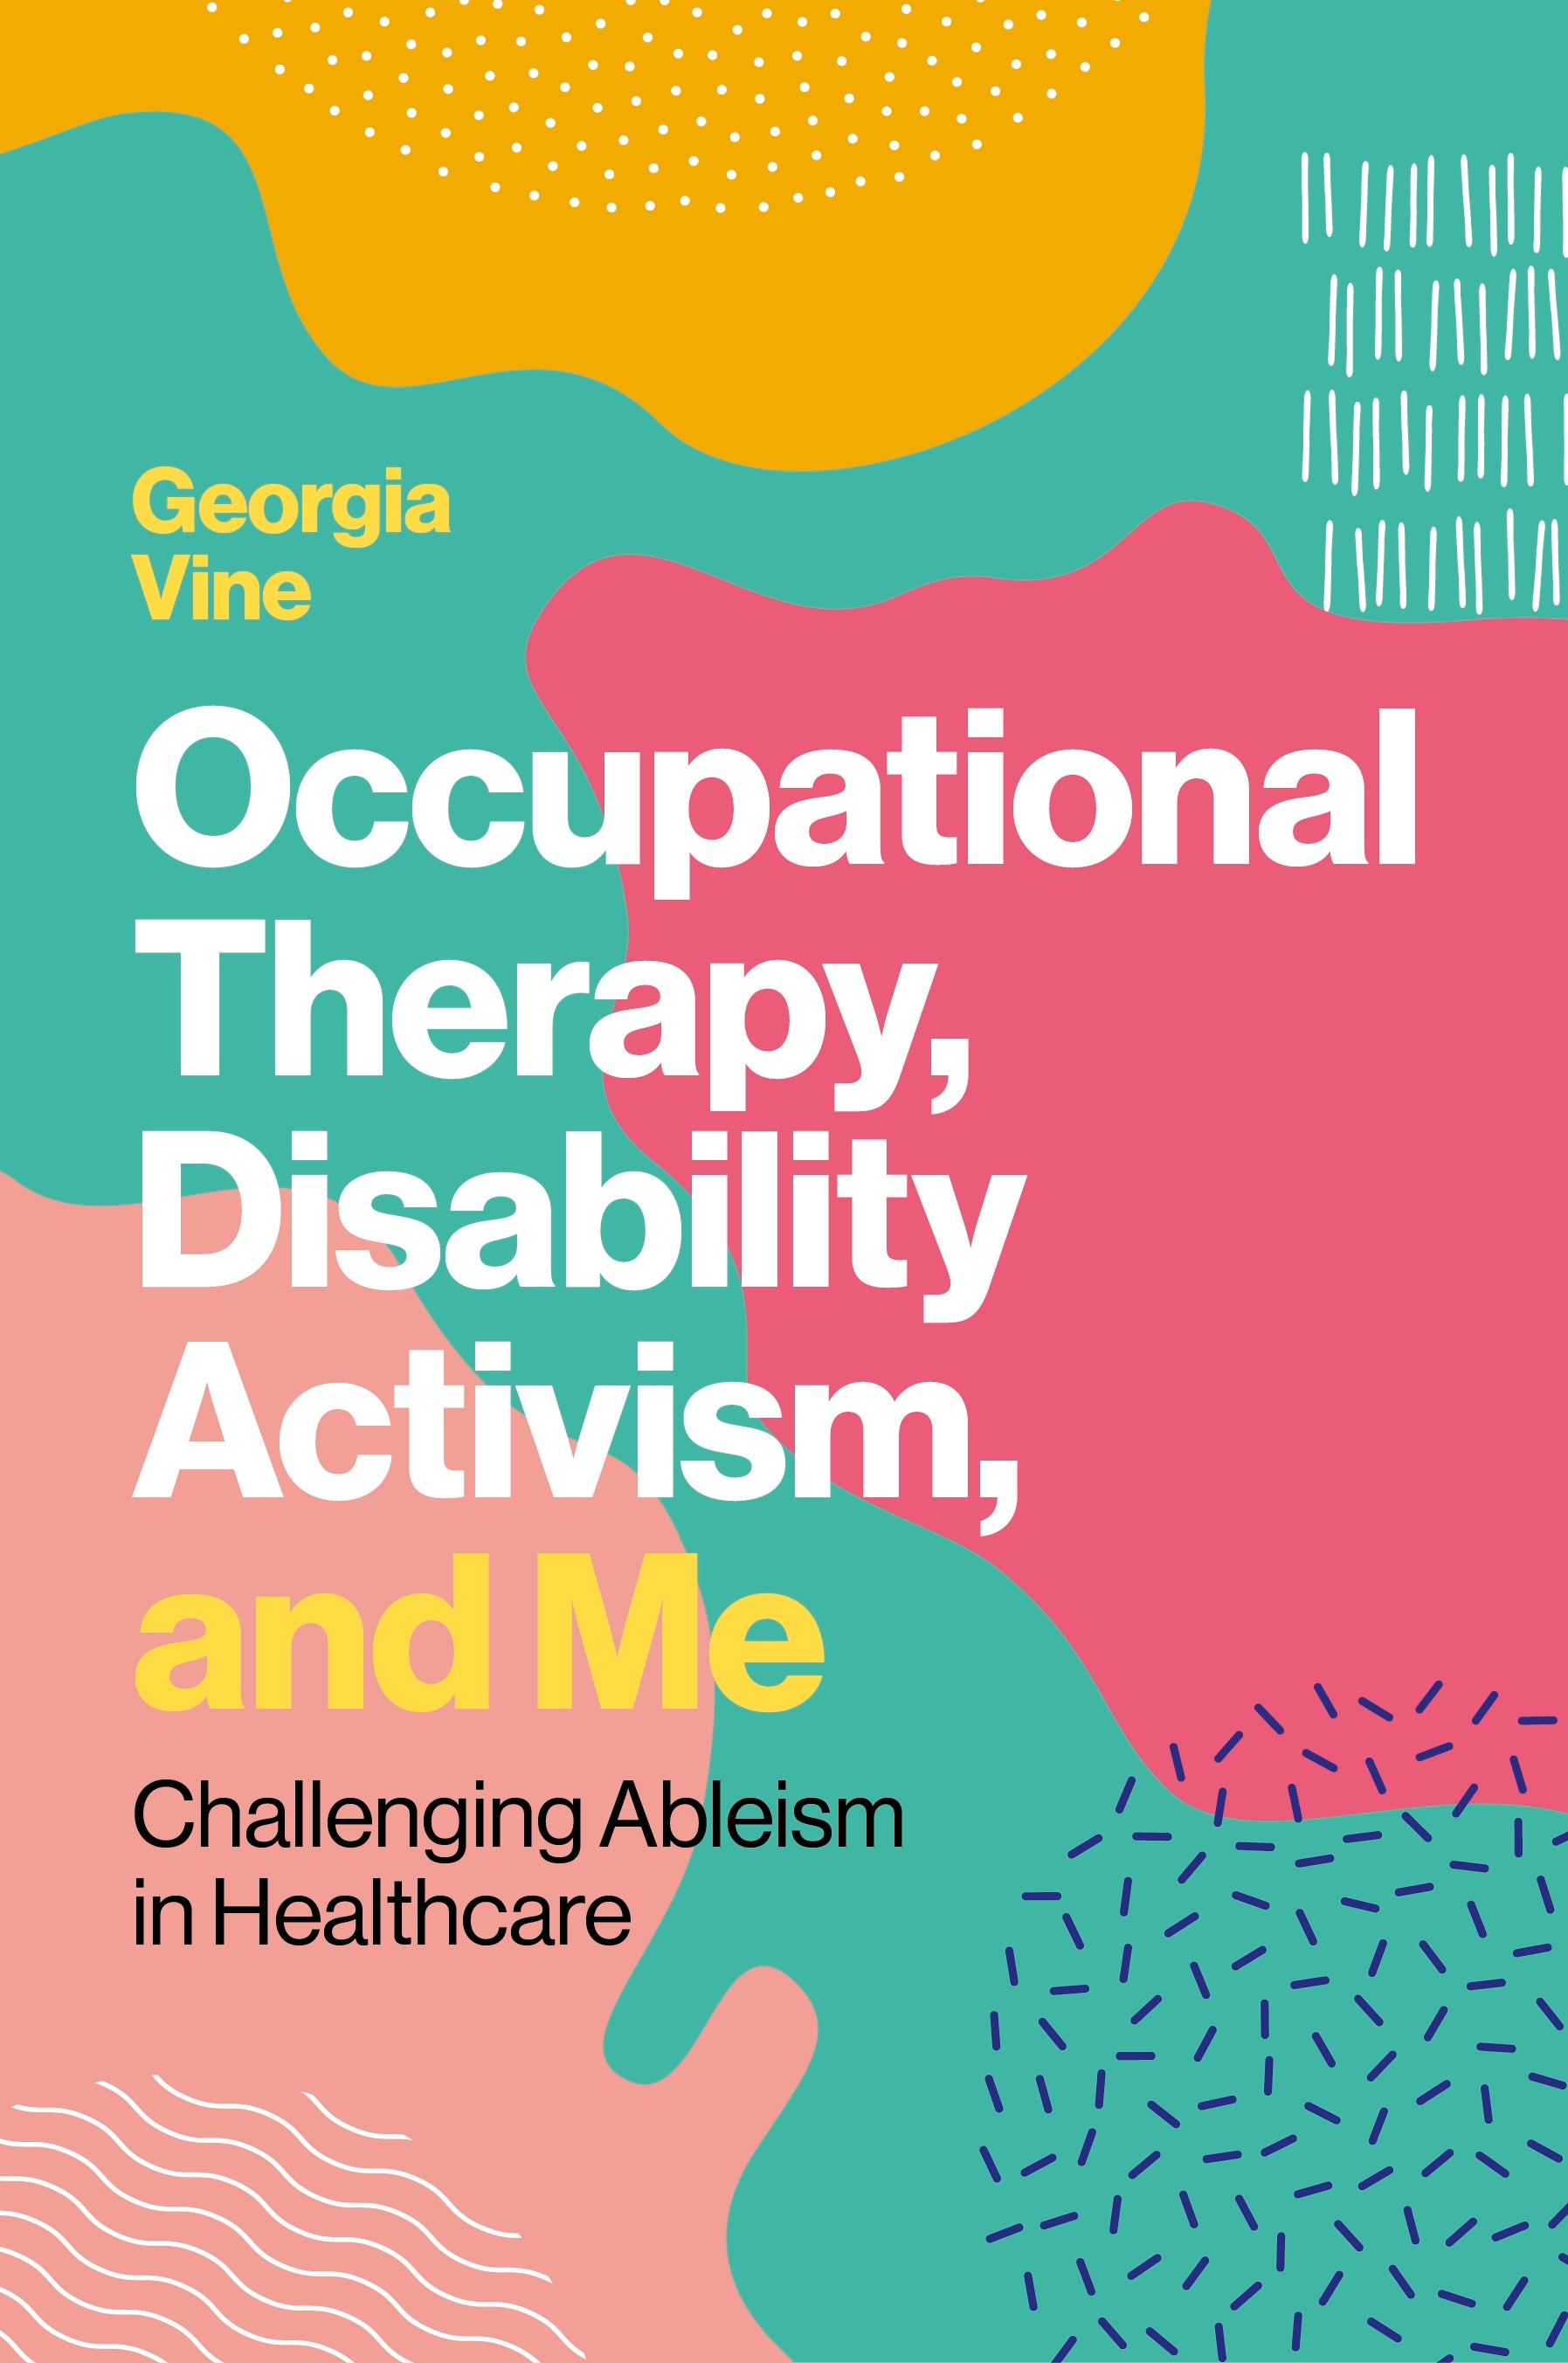 Occupational Therapy, Disability Activism, and Me by Georgia Vine